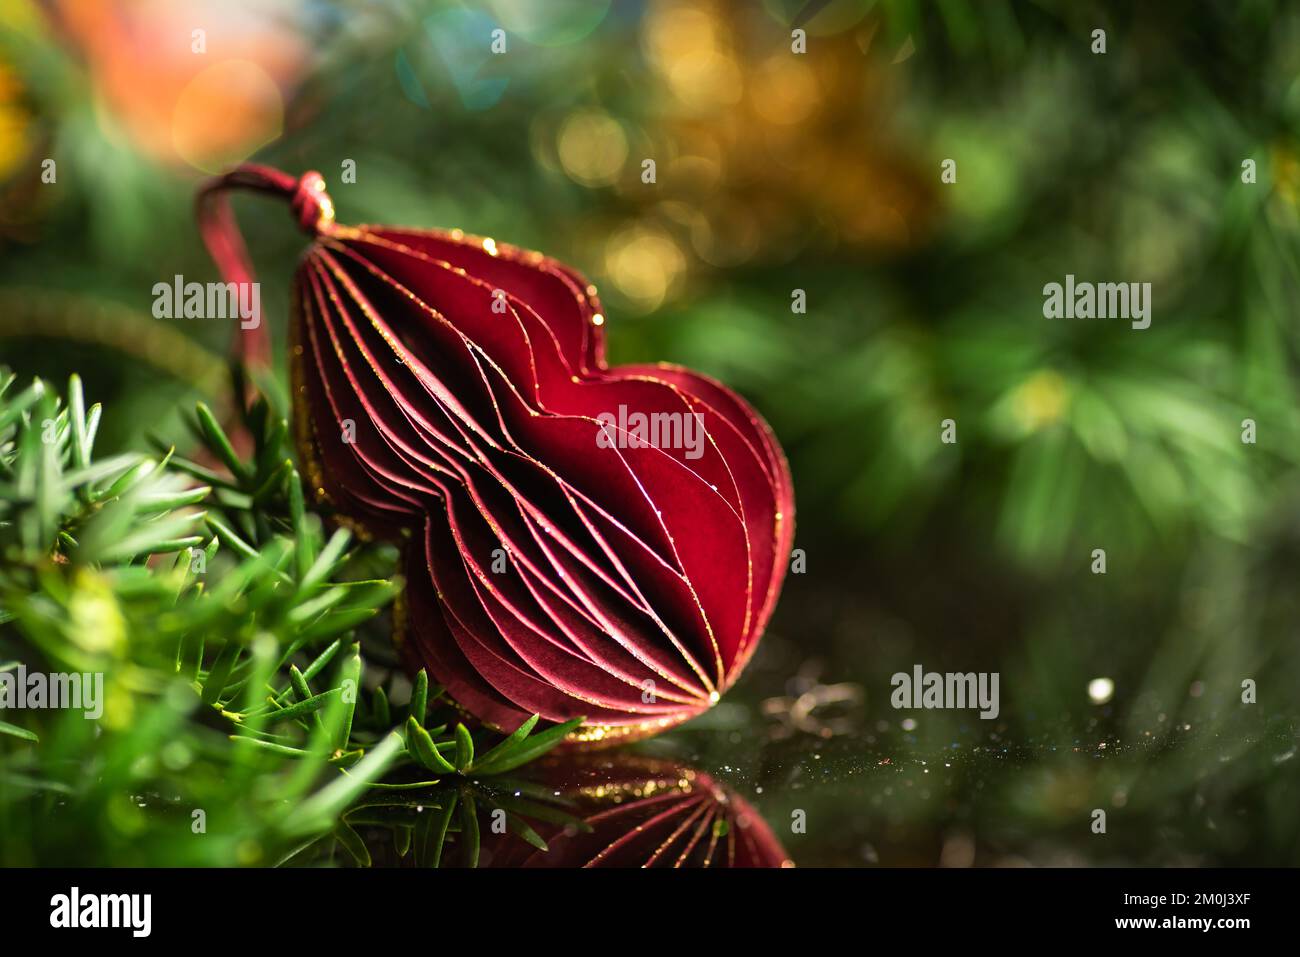 Festive winter holiday decoration and the Christmas tree with shiny fairy lights in the background Stock Photo